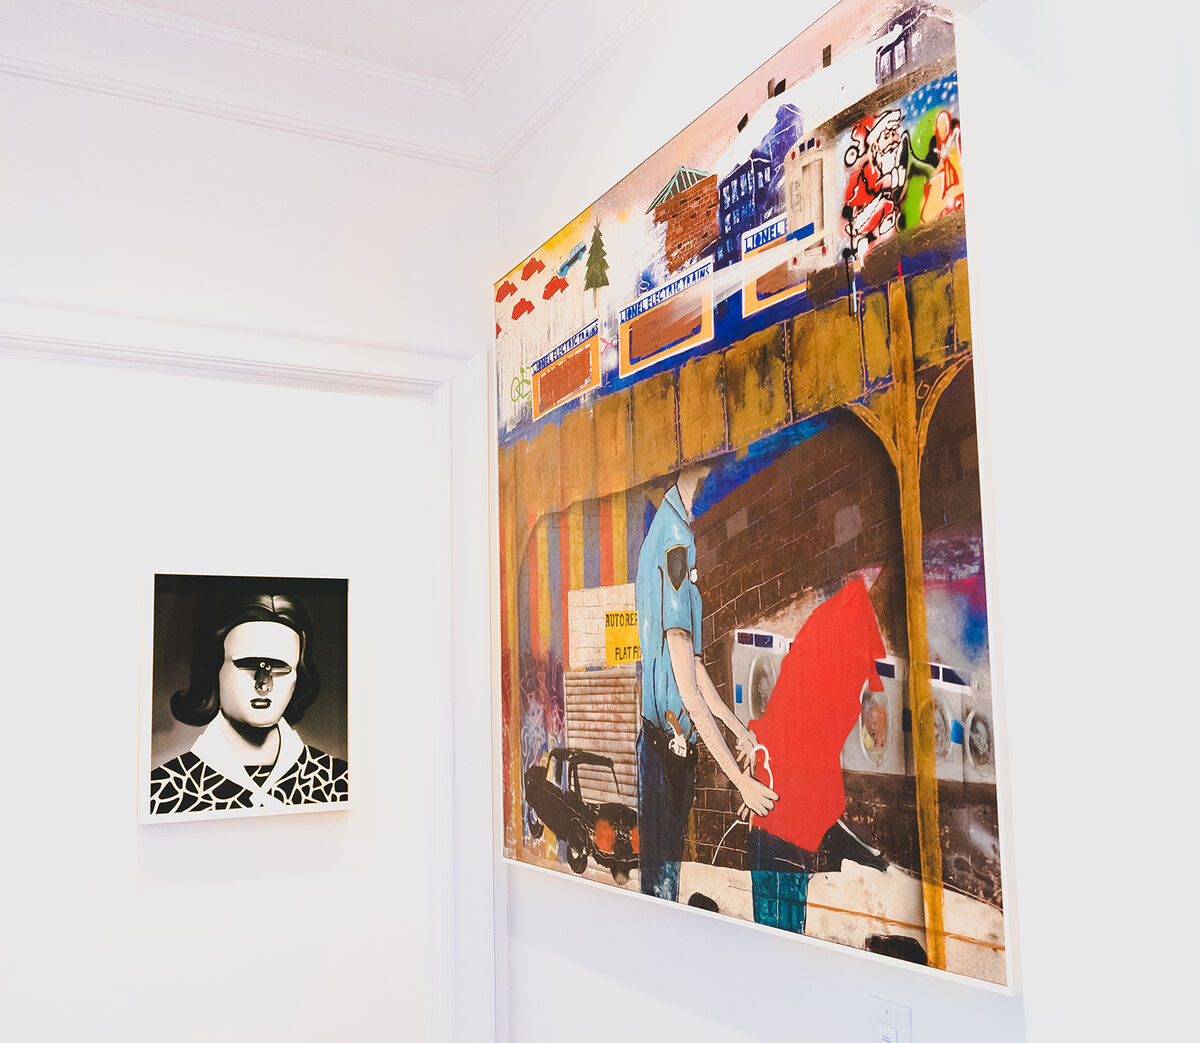 Installation view, from left to right, of works by Tomoo Gokita and Pat Phillips. Photo by Sir Will for Artsy.